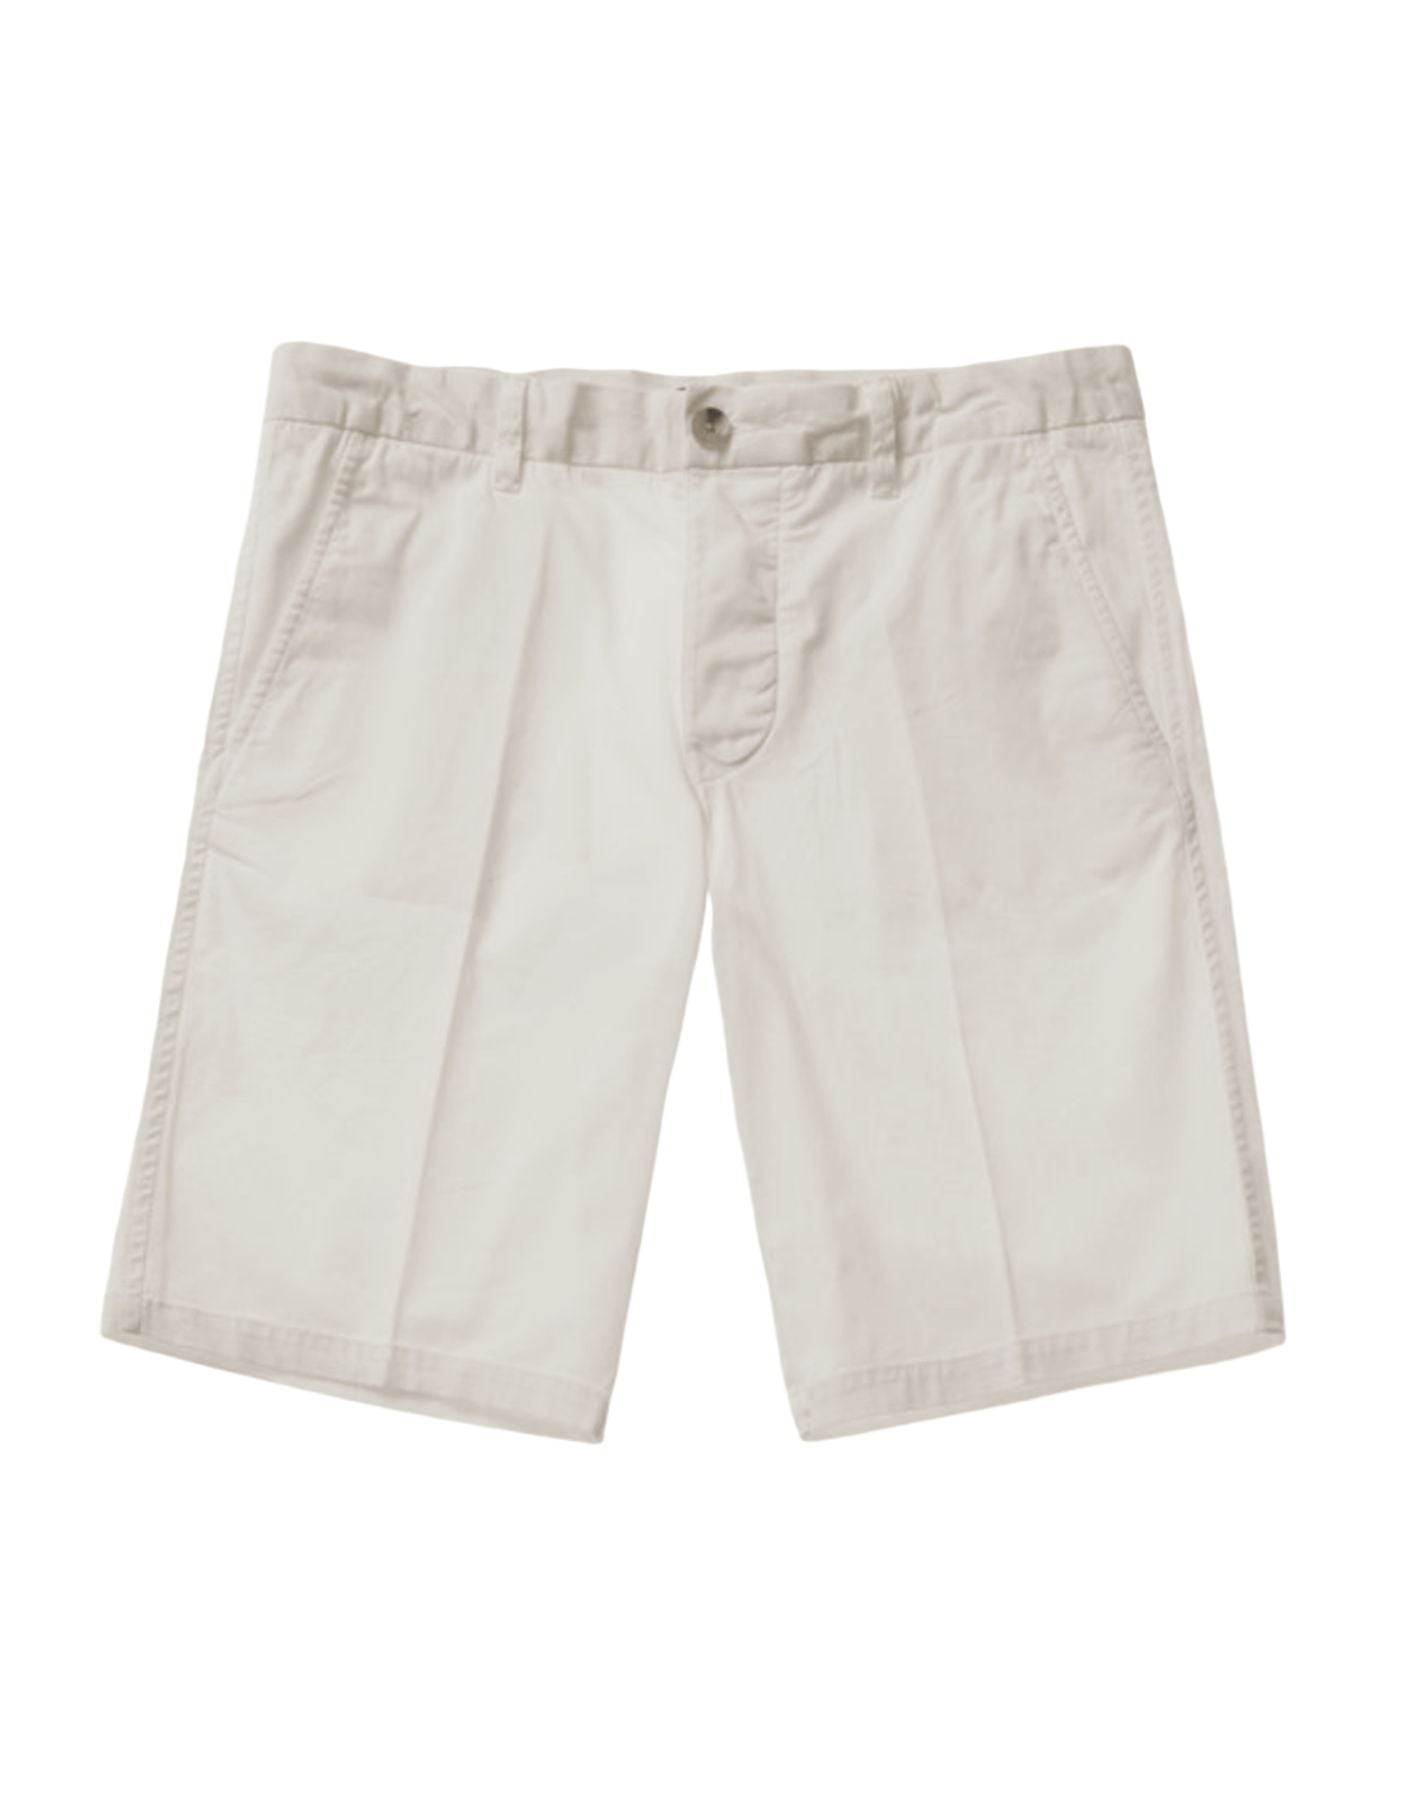 Shorts for man 24SBLUP02406 006855 102 Blauer